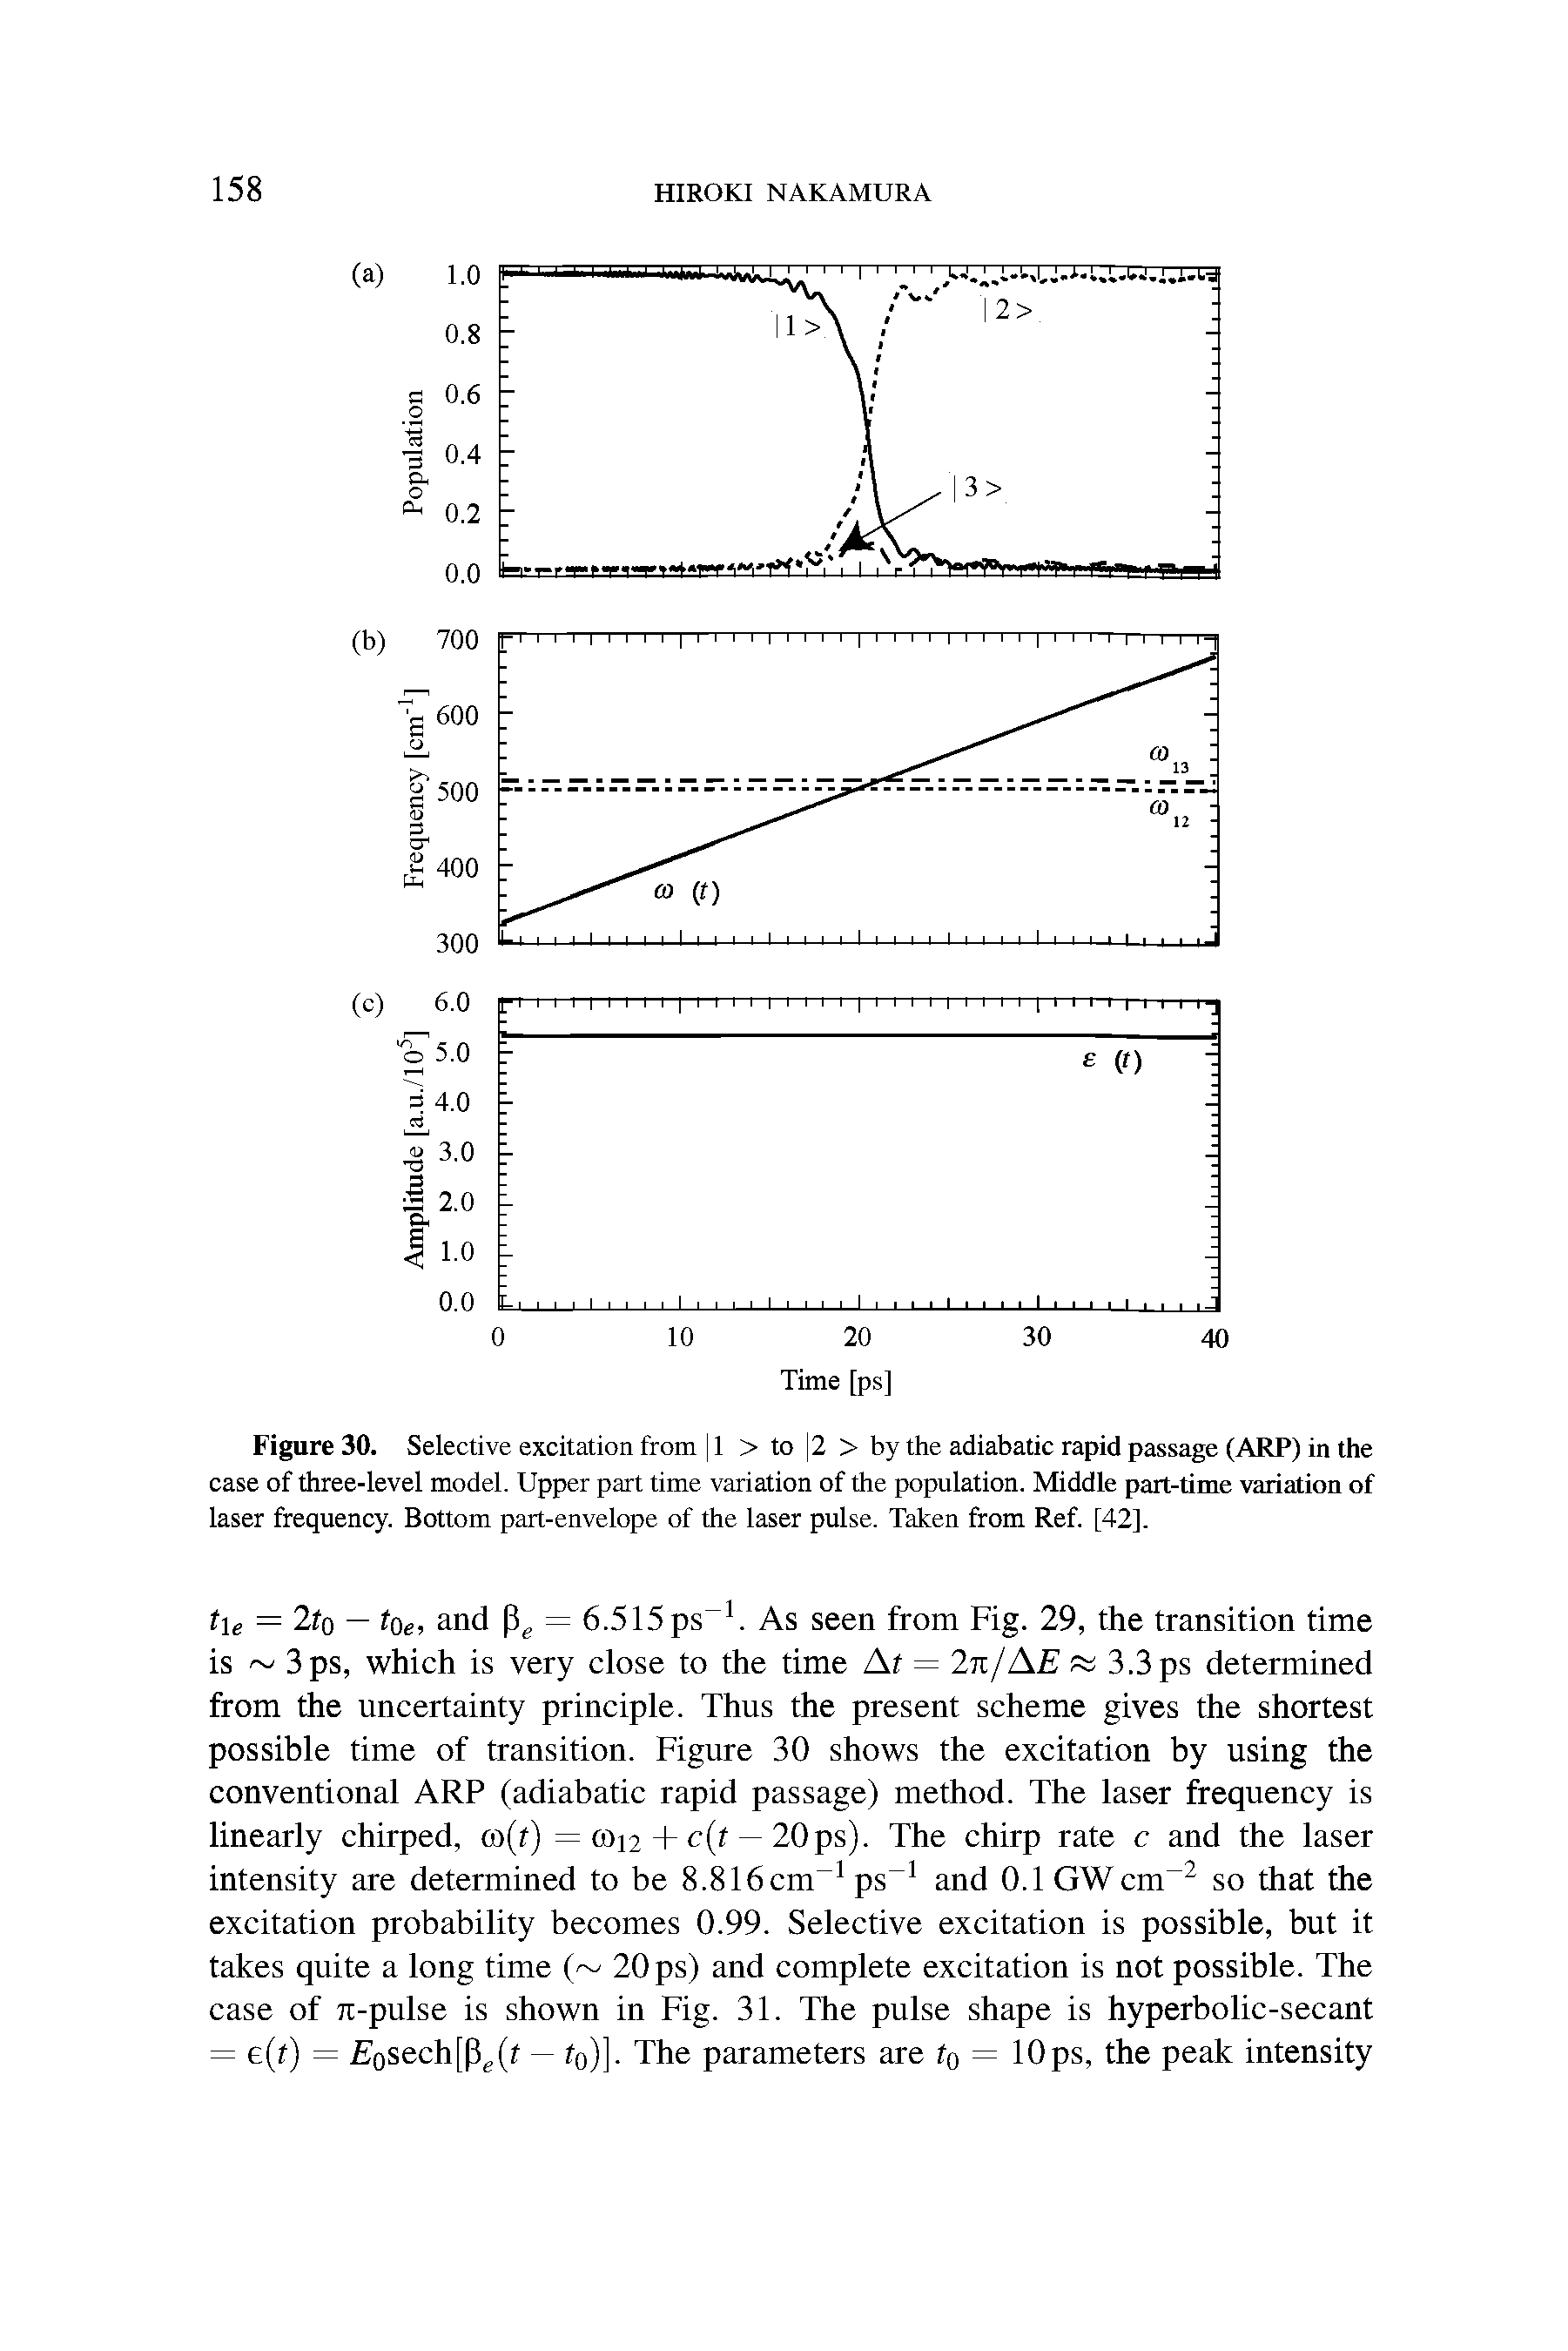 Figure 30. Selective excitation from 11 > to 2 > by the adiabatic rapid passage (ARP) in the case of three-level model. Upper part time variation of the population. Middle part-time variation of laser frequency. Bottom part-envelope of the laser pulse. Taken from Ref. [42].